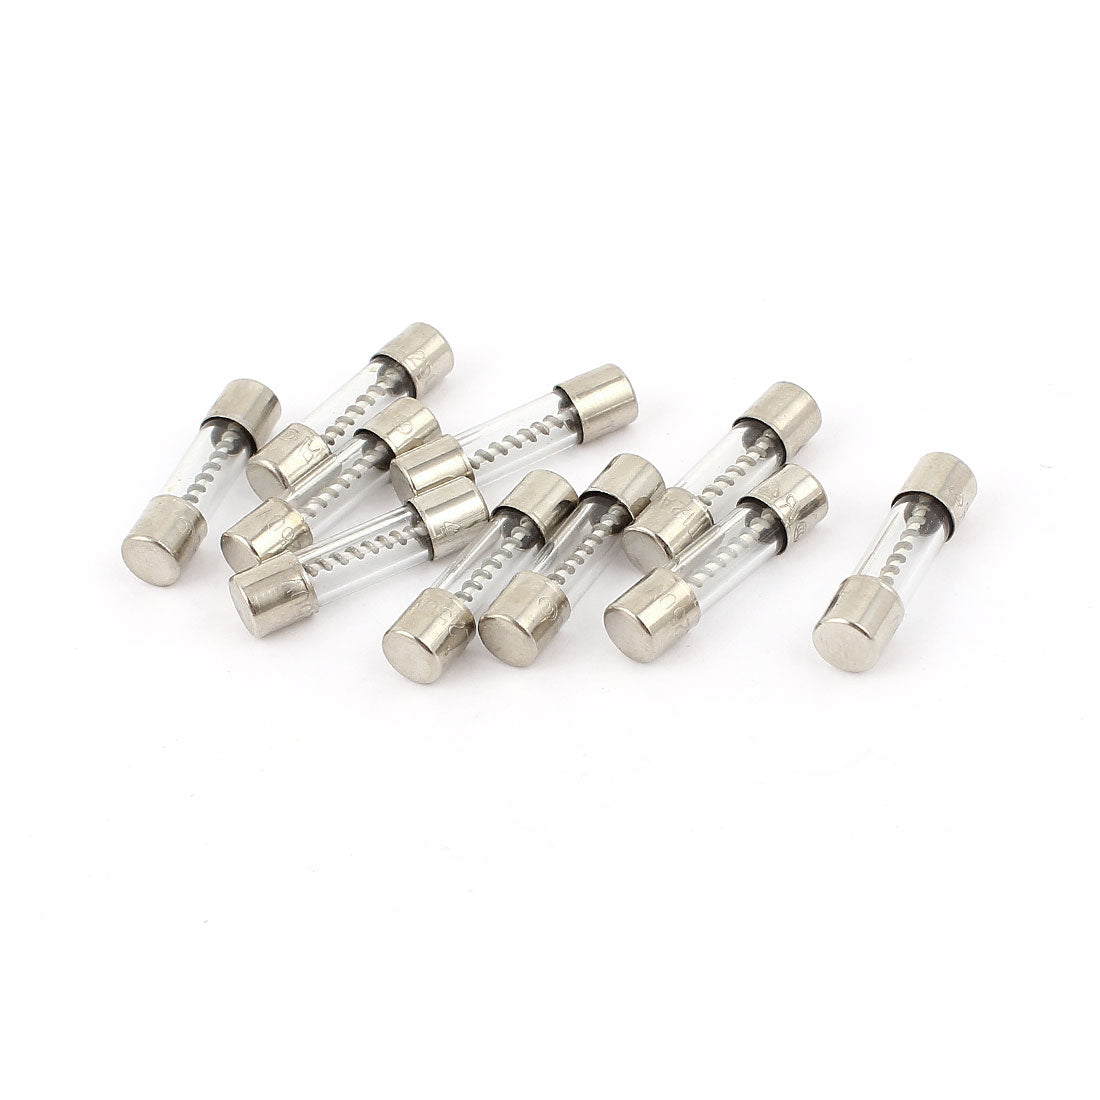 uxcell Uxcell 10 Pcs 250V 12A 12Amp Slow Blow Glass Fuses Tubes 5mm x 20mm